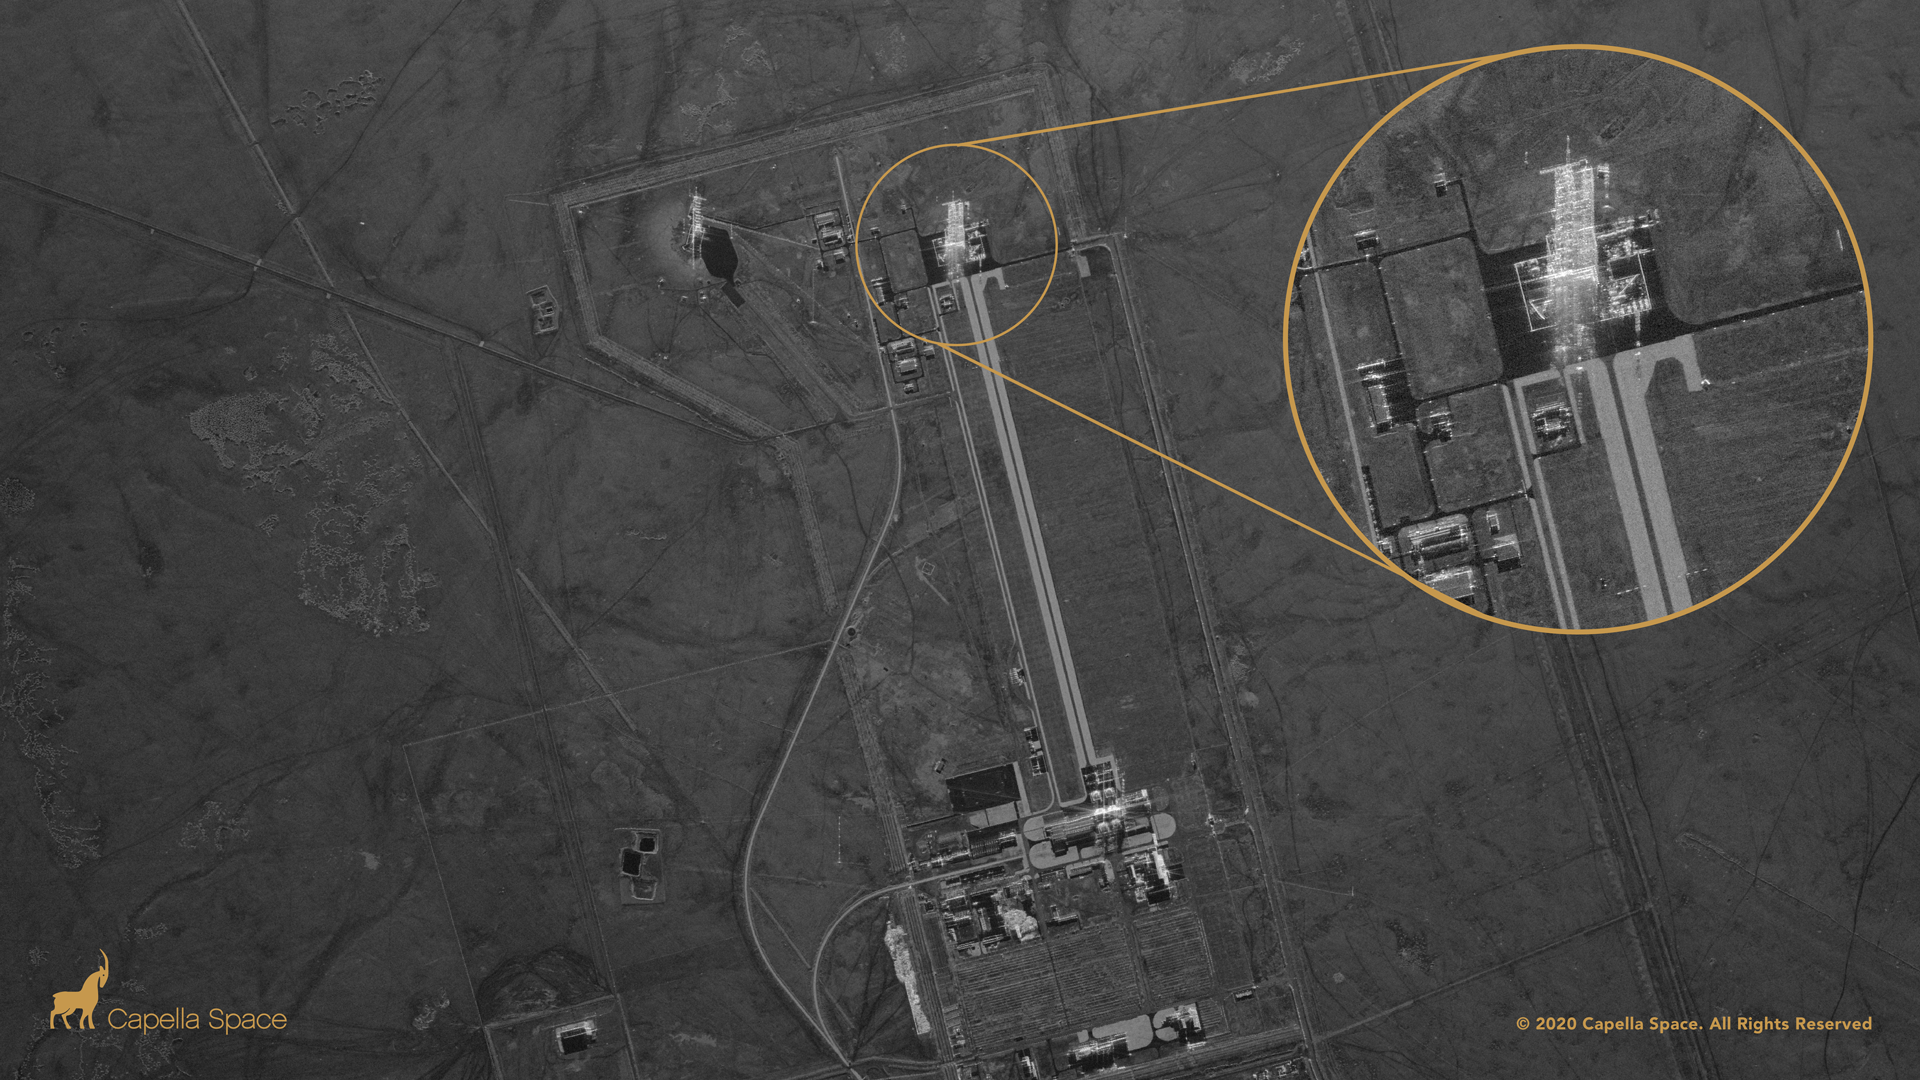 The launch towers are visible in this image of China's Jiuquan spaceport